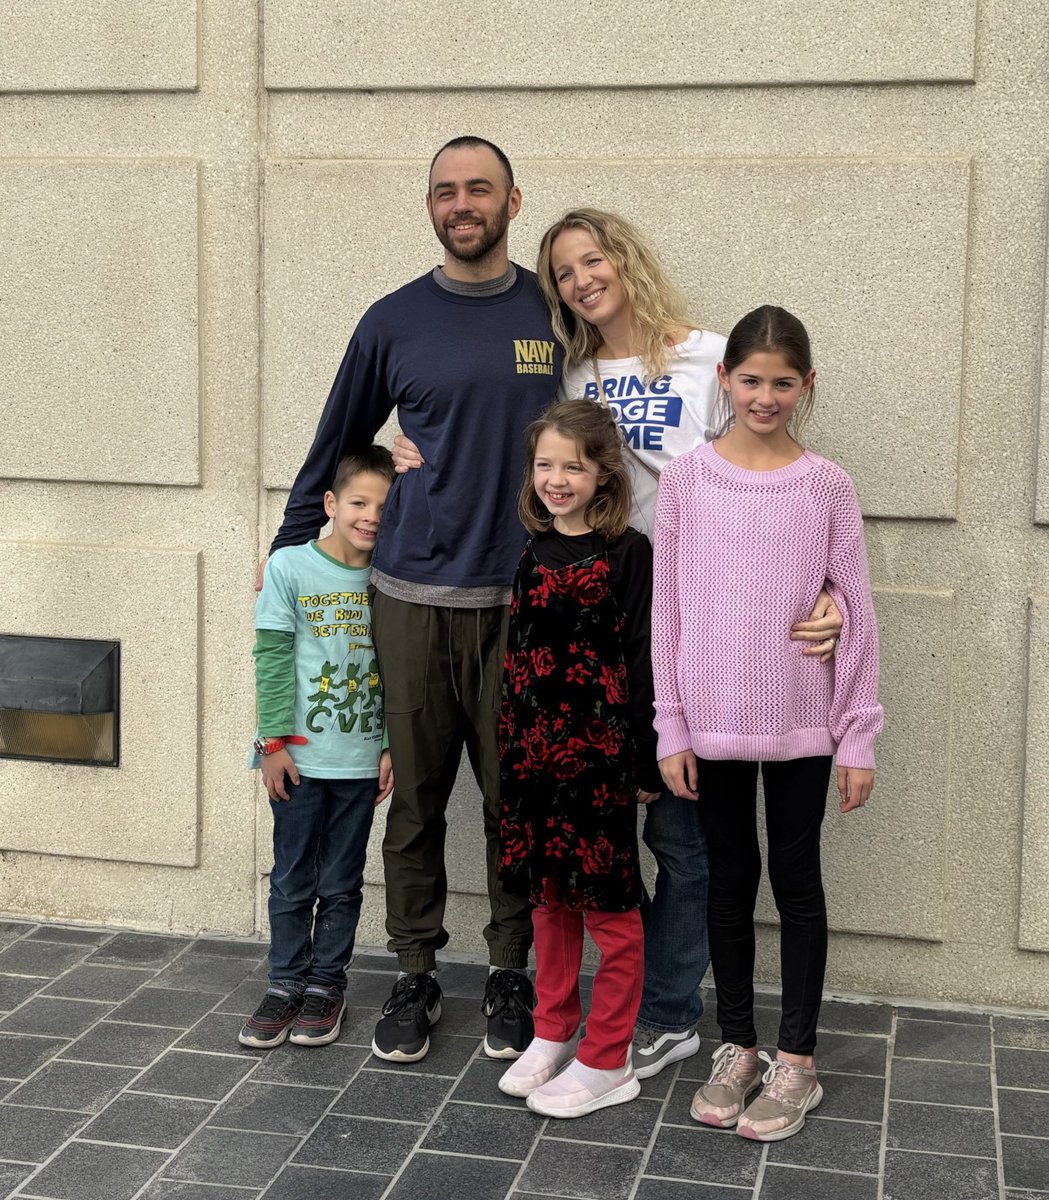 🚨🚨Ridge is FREE🚨🚨 The Alkonis family is finally reunited! The U.S. Parole Commission ordered Ridge’s immediate release this morning. Thank you to everyone who helped us to @BringRidgeHome!